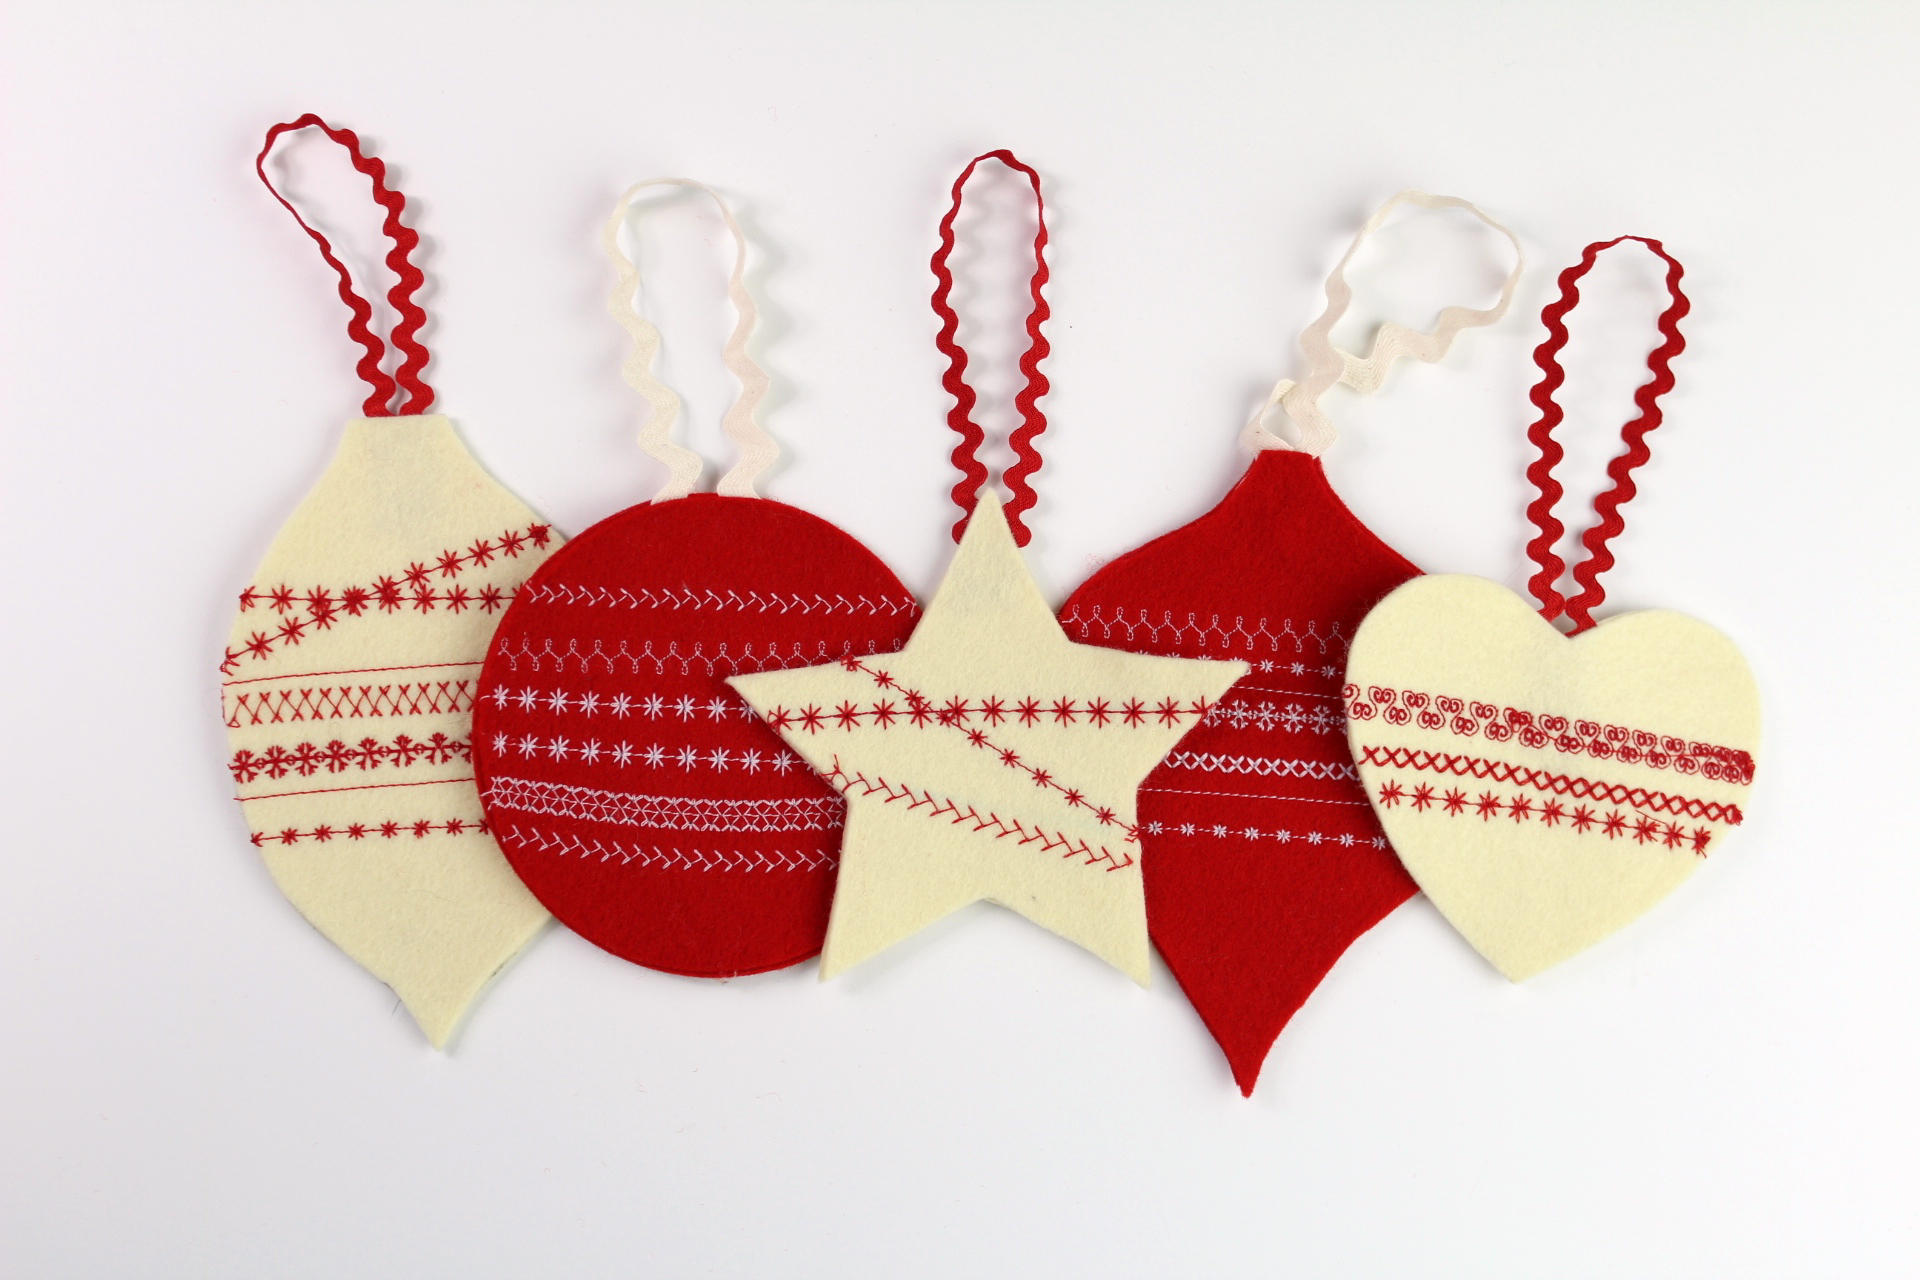 Finished felt ornaments side-by-side.